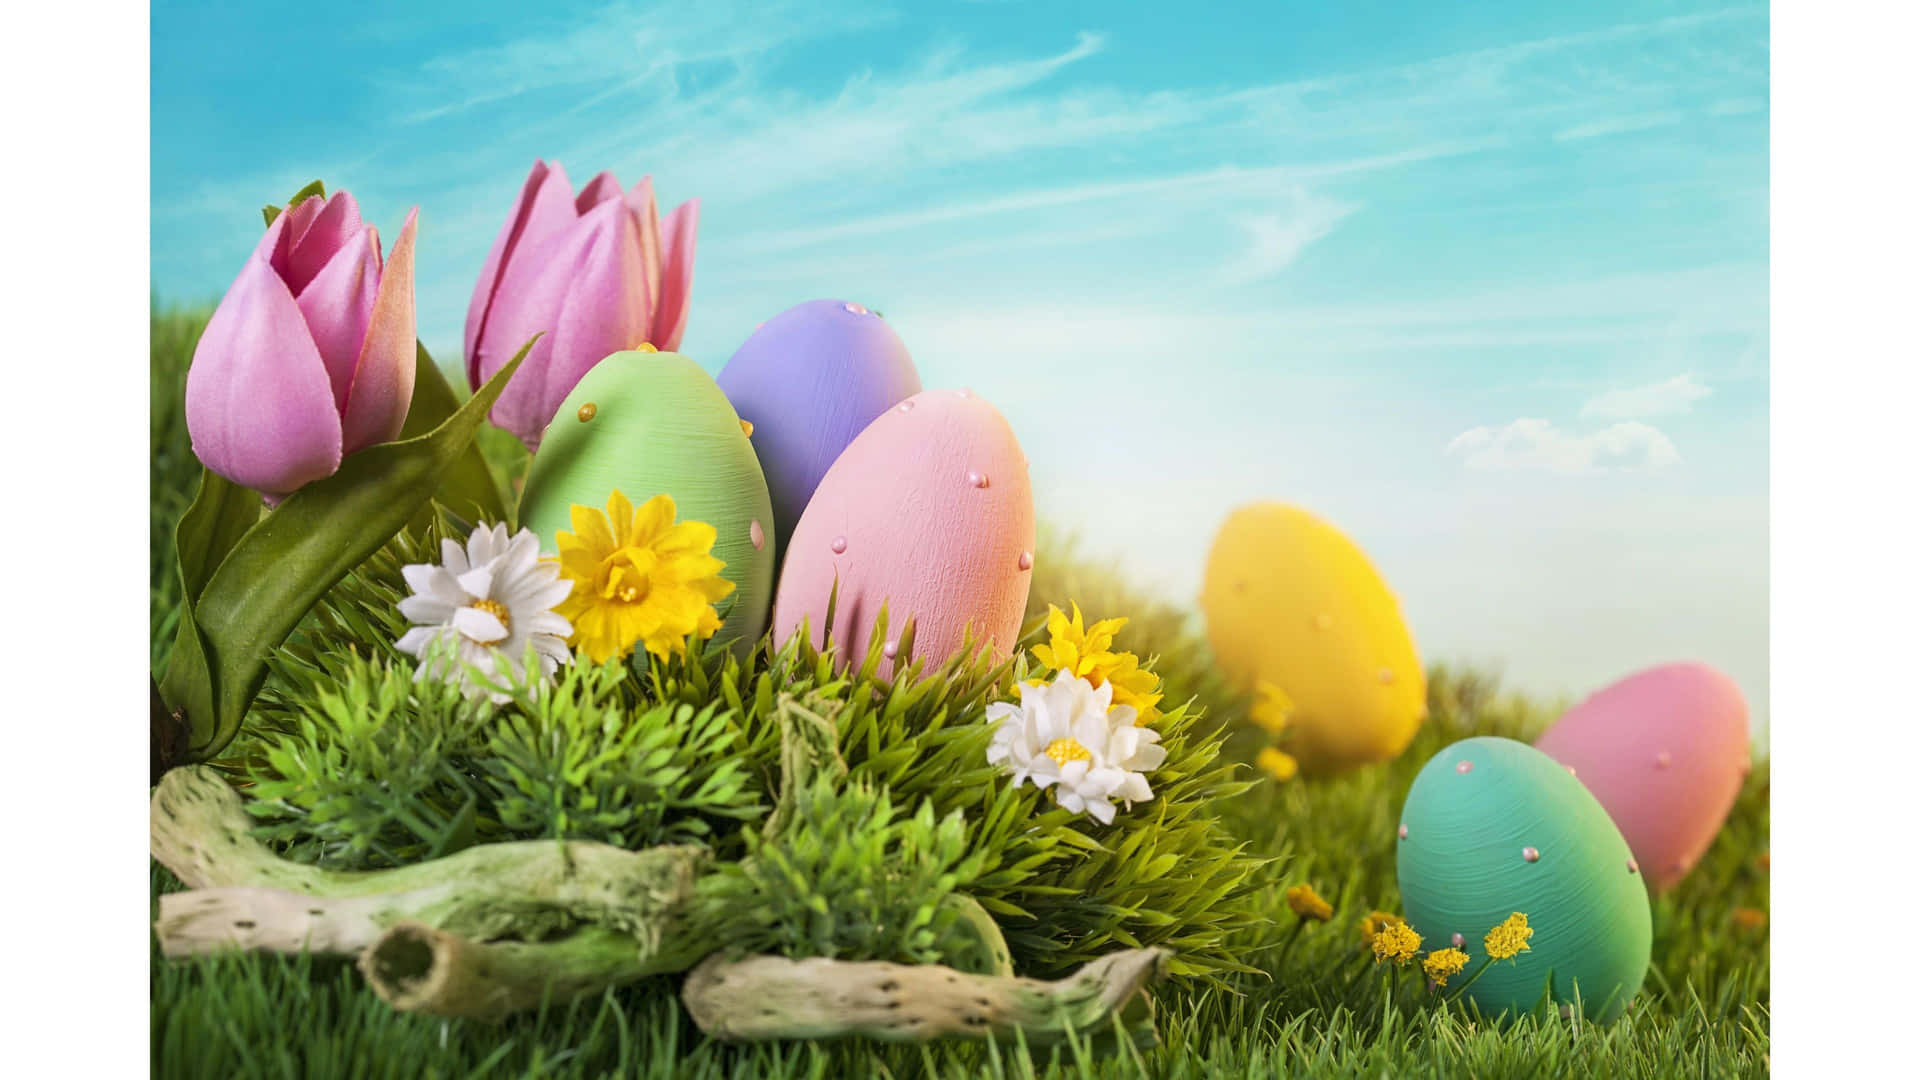 A colorful background of objects celebrating Easter